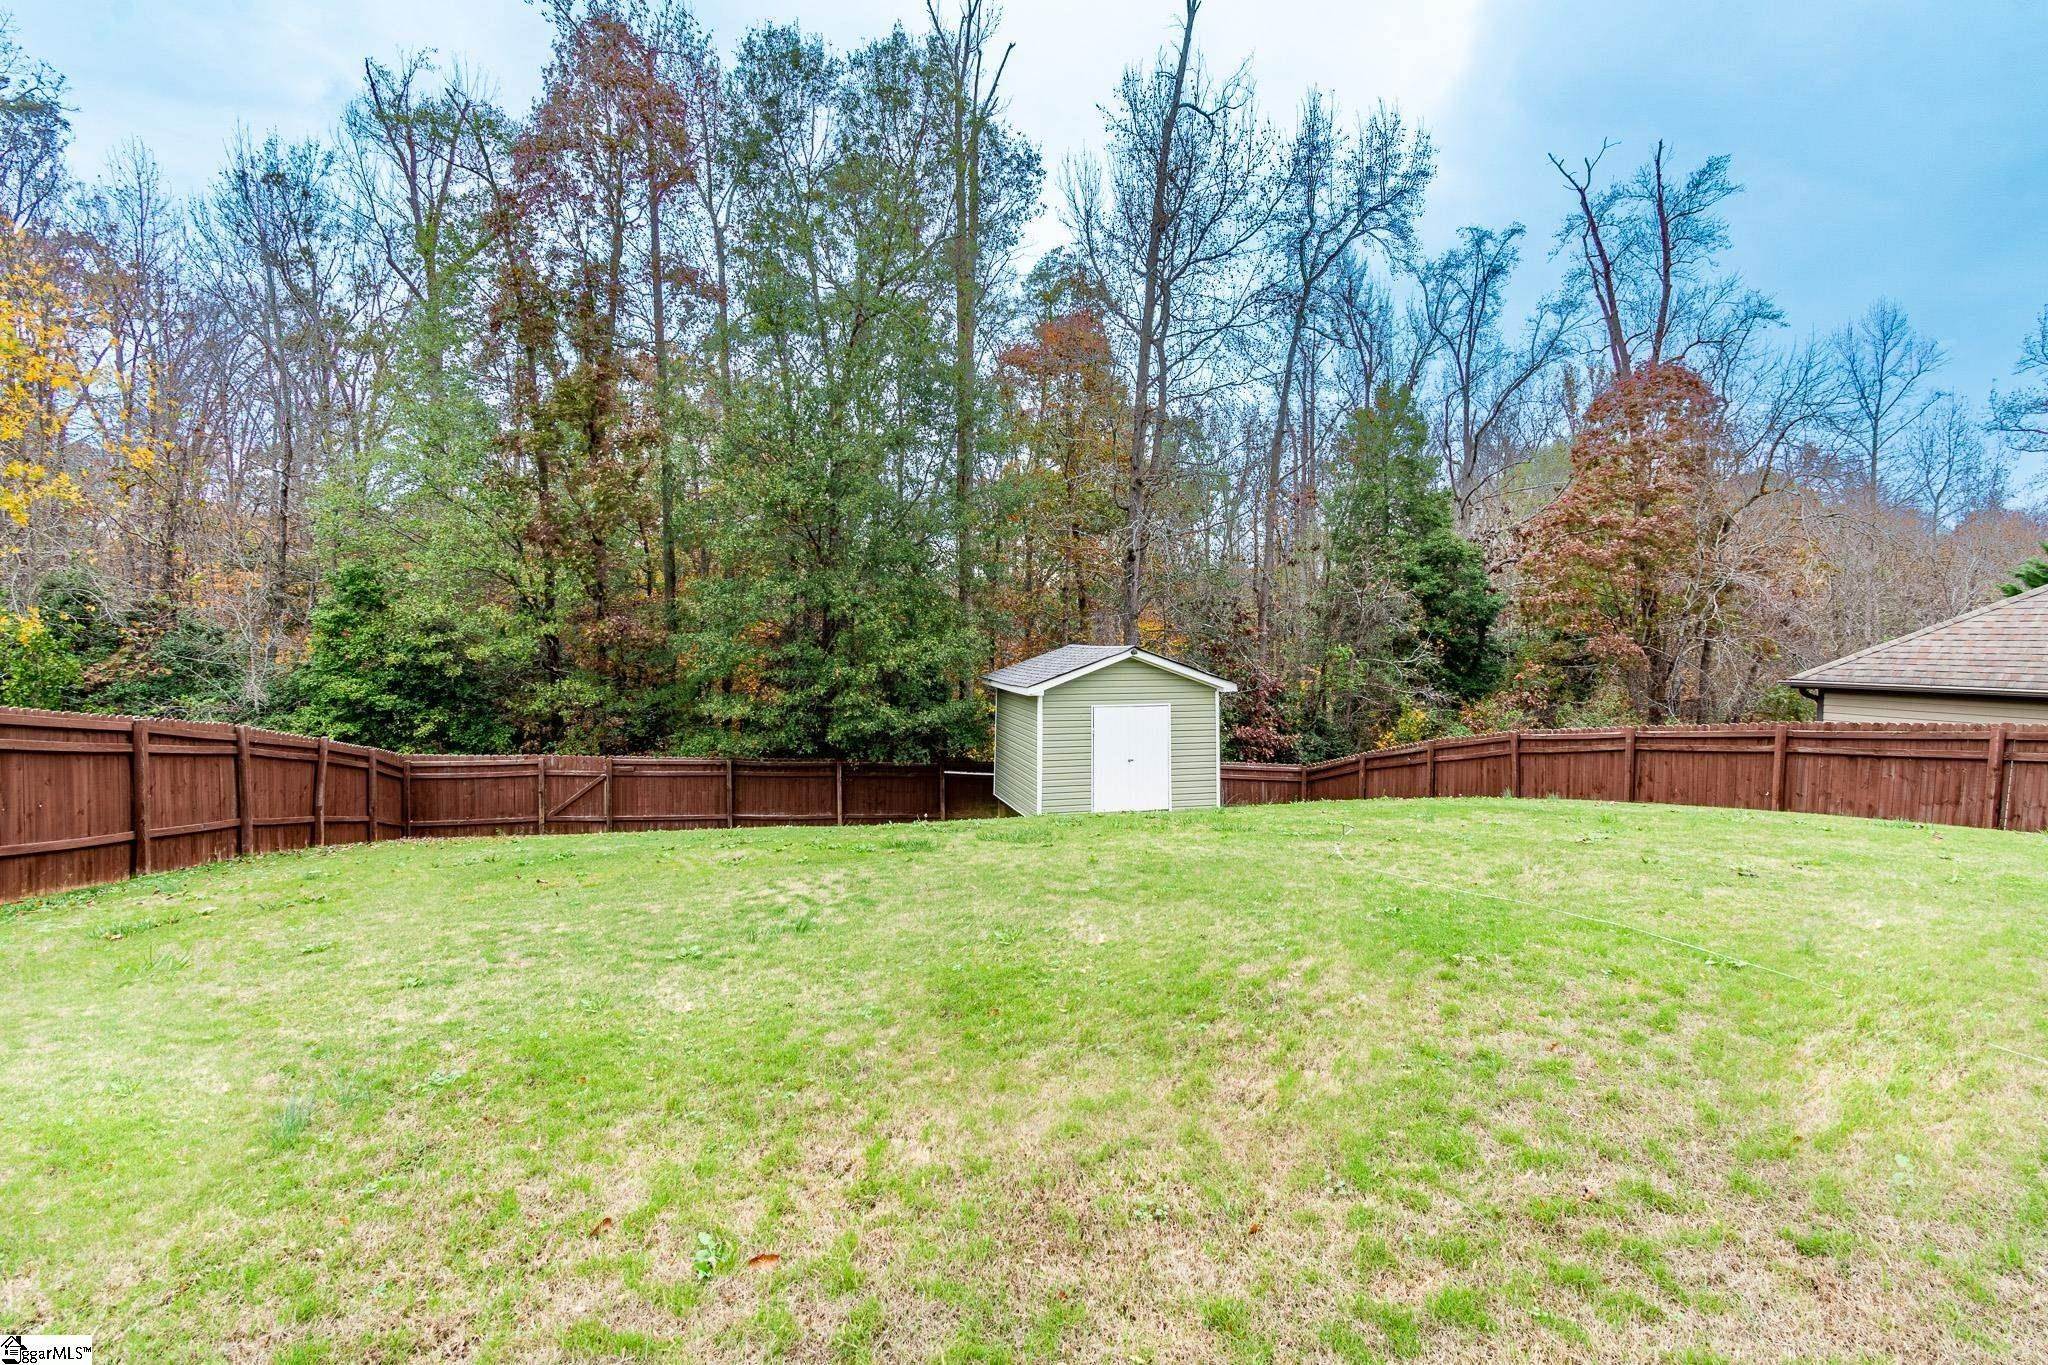 24. Single Family for Sale at Greenville, SC 29605